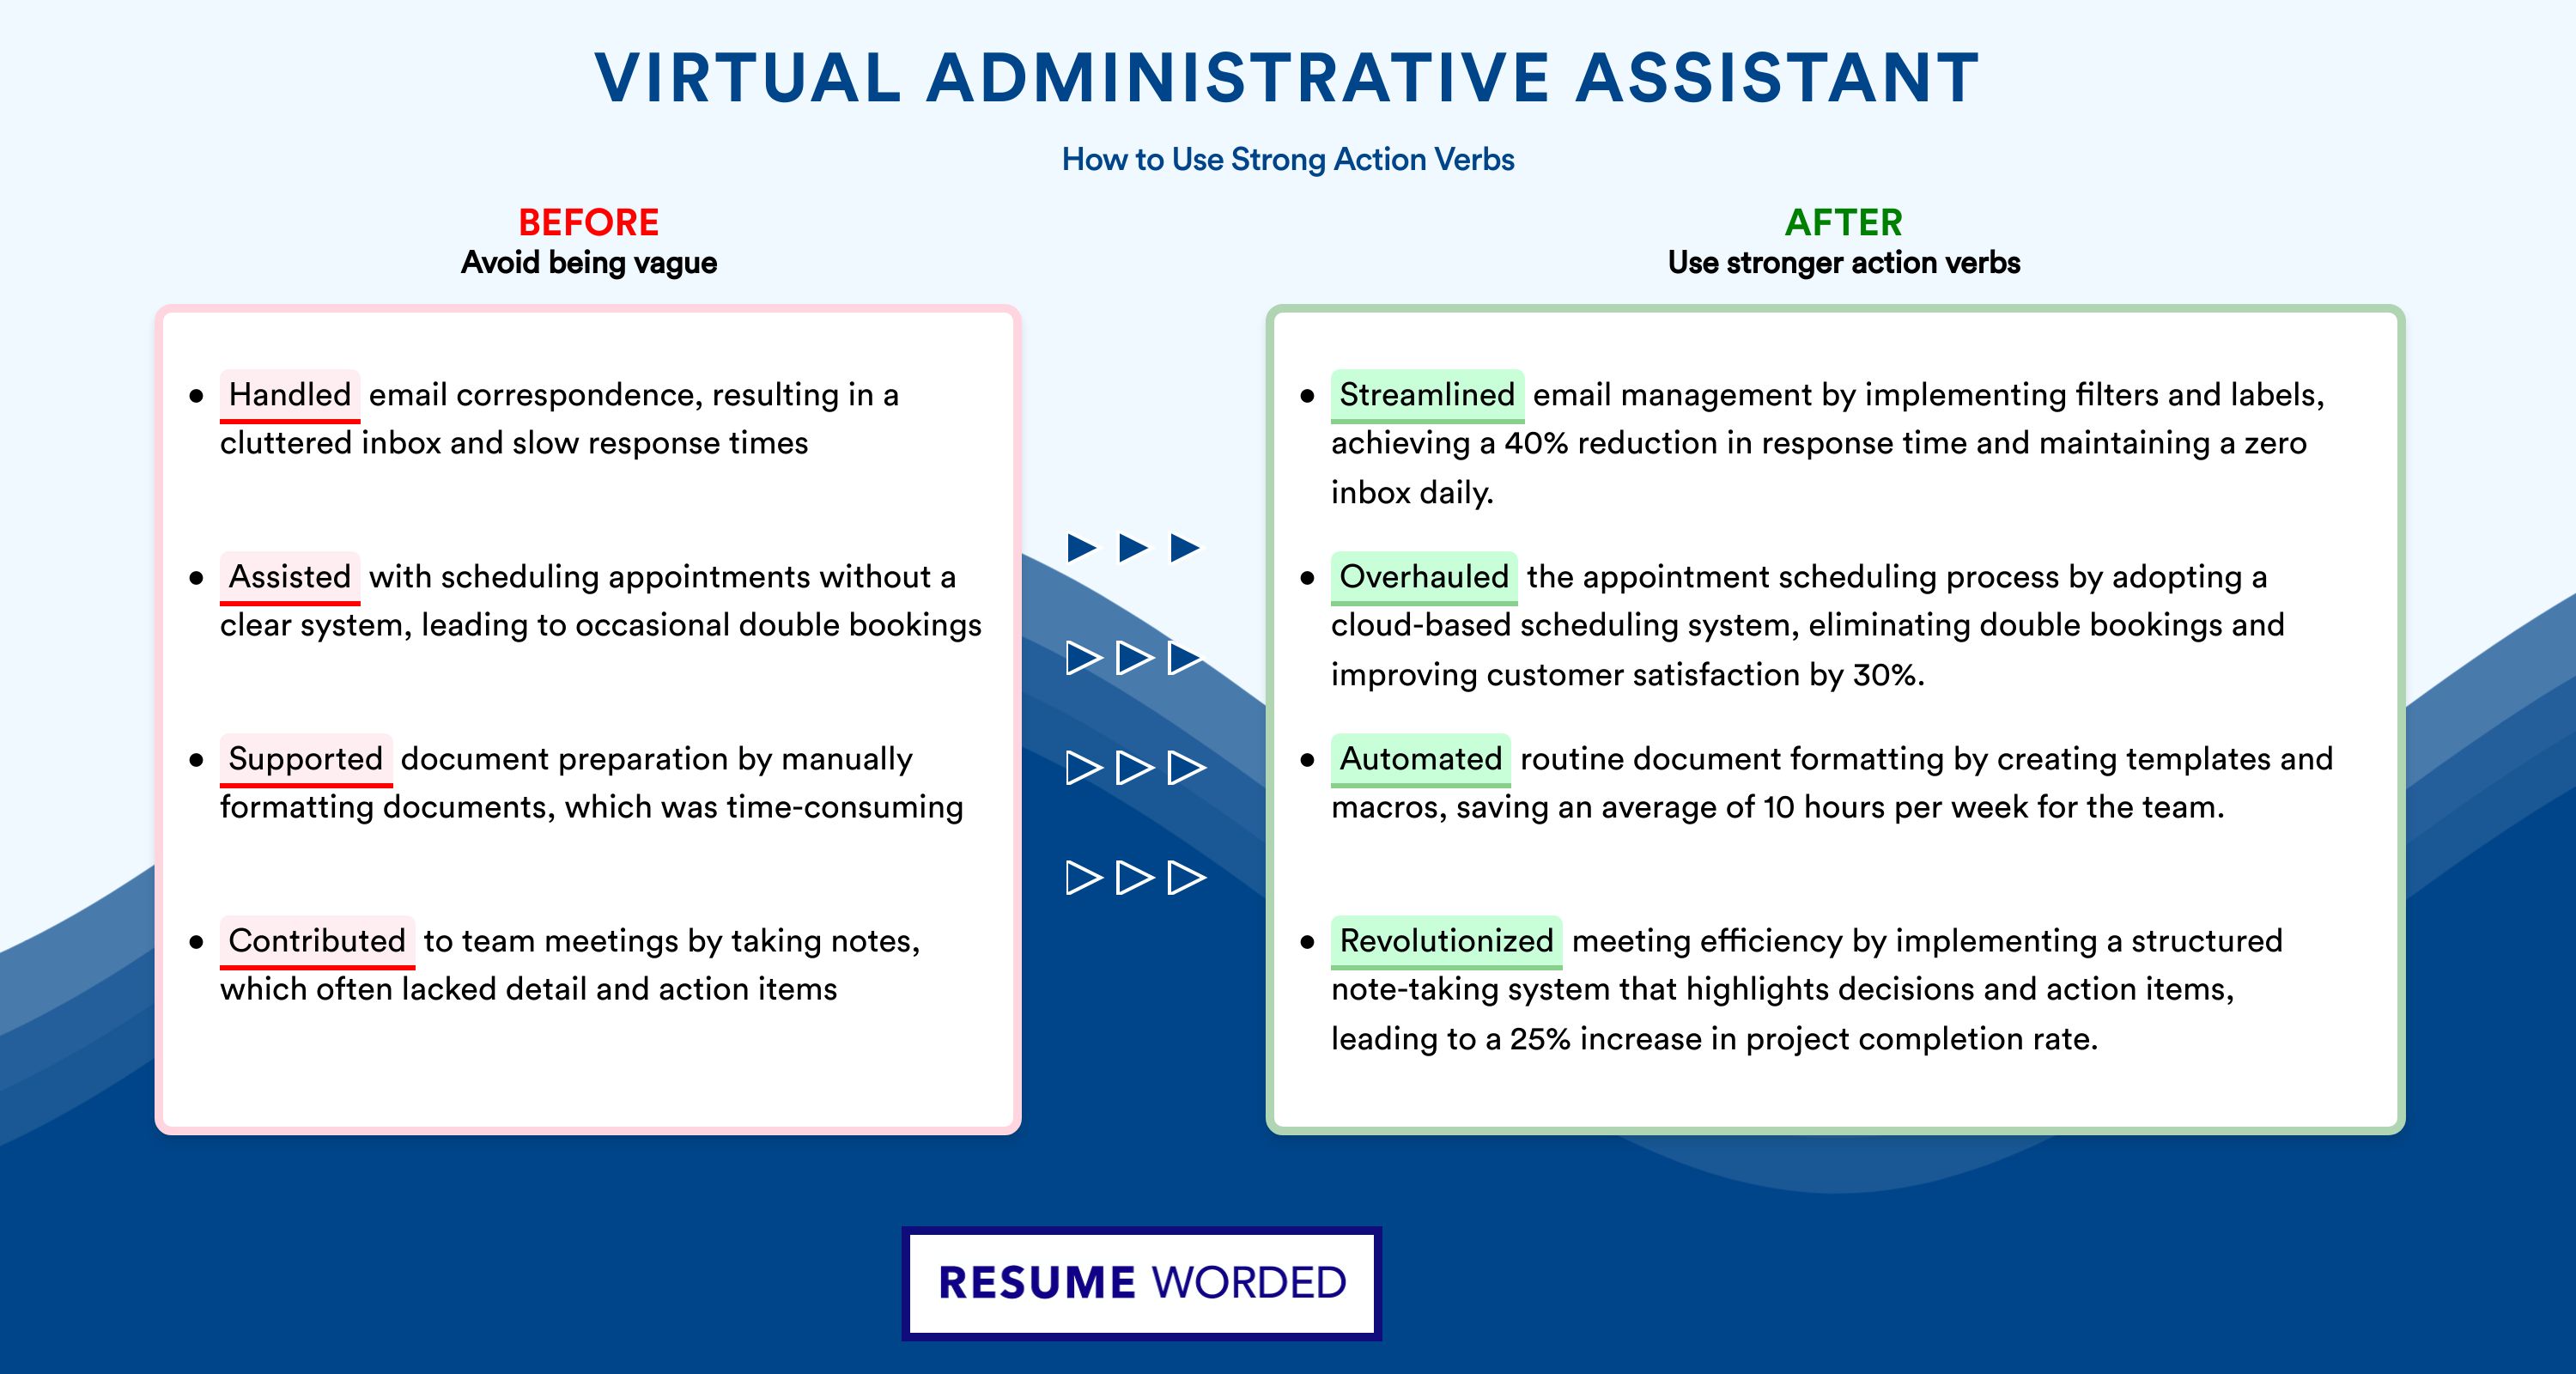 Action Verbs for Virtual Administrative Assistant